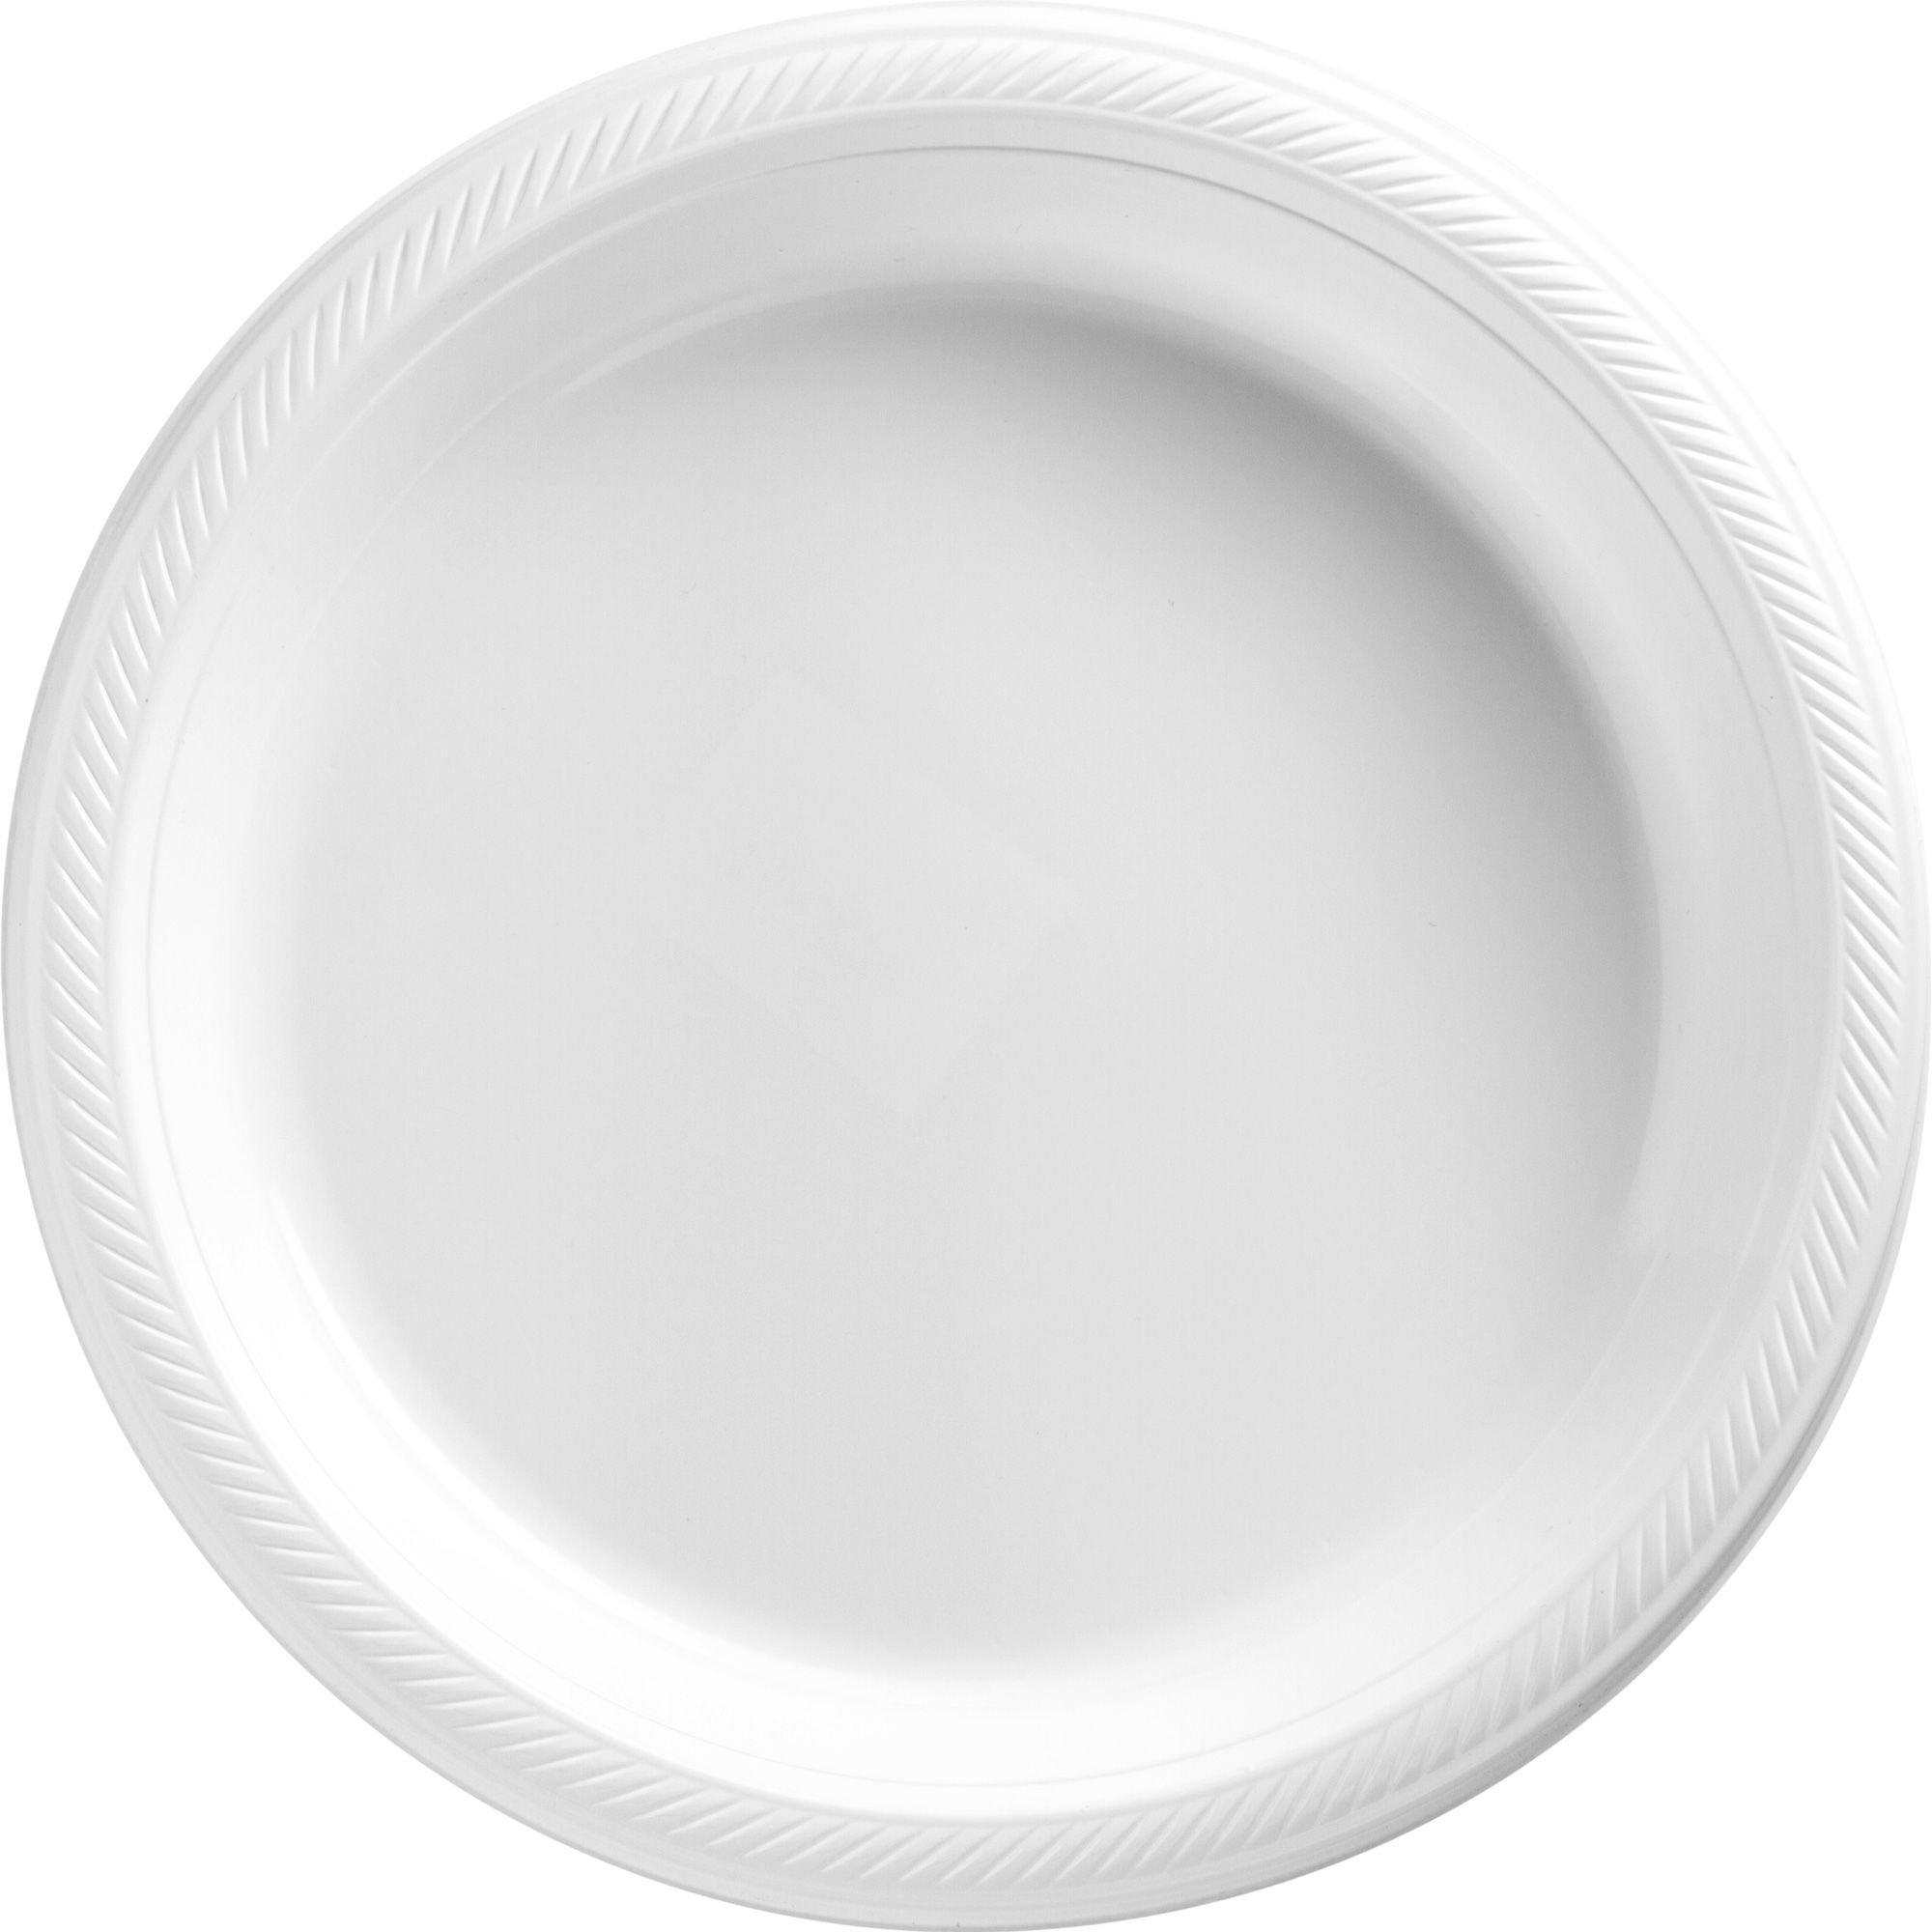 Ideal Dining 10 Inches Disposable Dinner Plastic Plates, Red